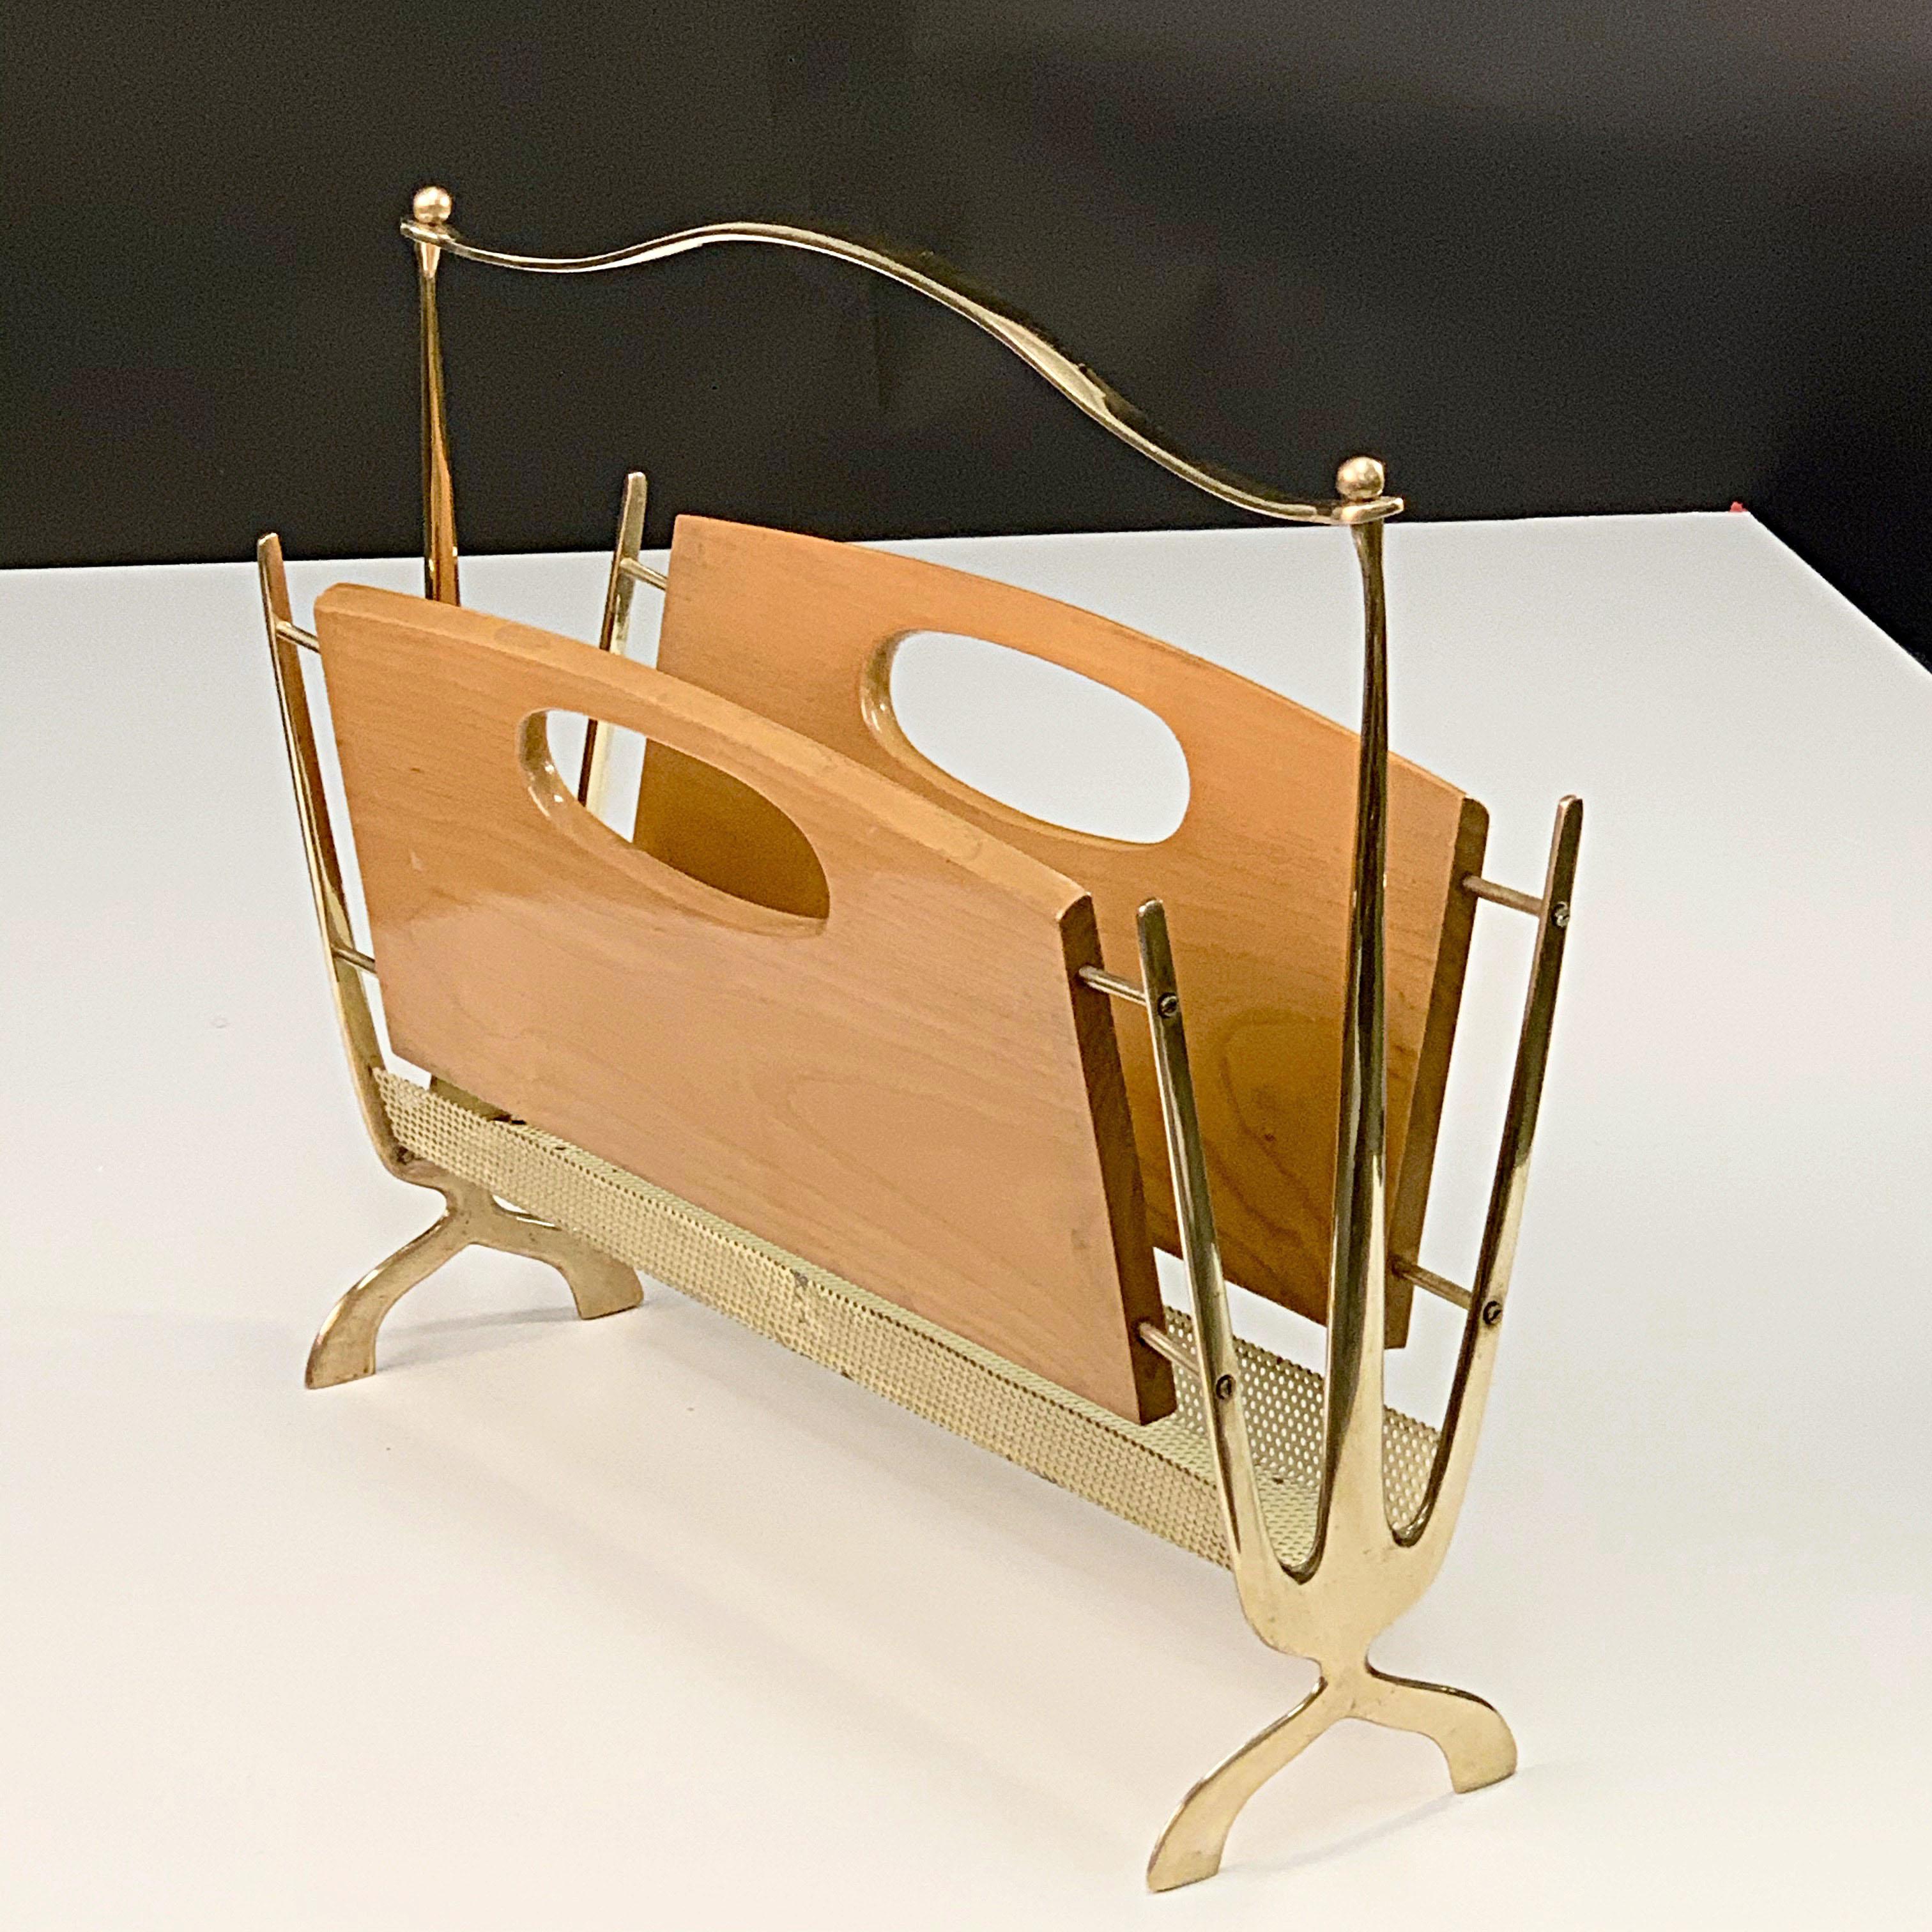 Maison Baguès Midcentury Brass and Chestnut Wood French Magazine Rack, 1950s For Sale 1